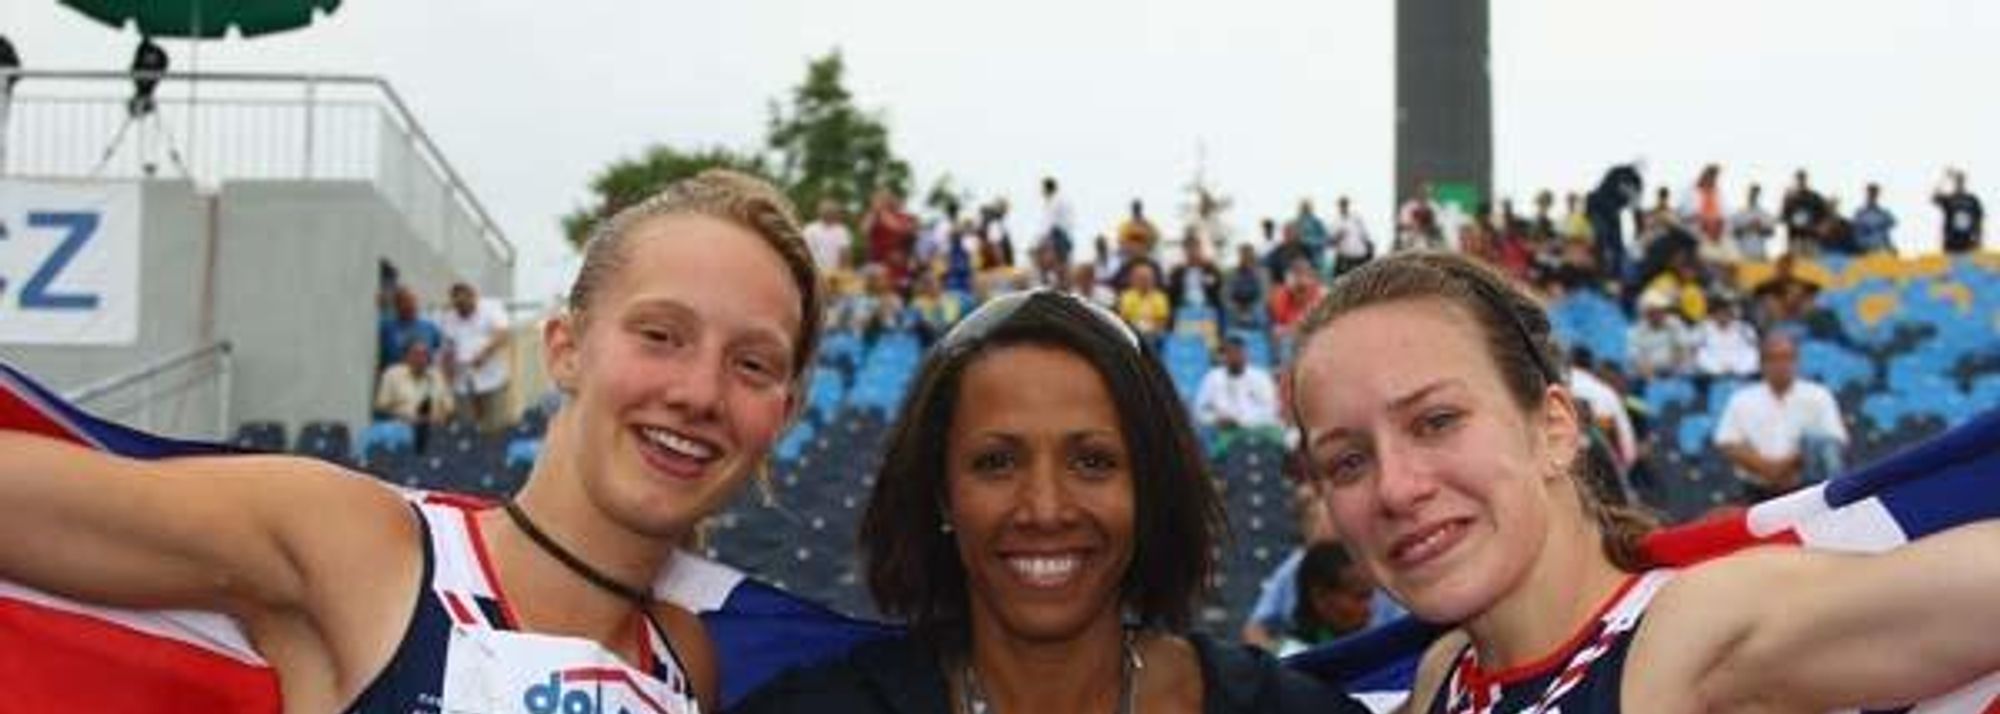 After Great Britain’s Emma Pallant landed the 1500m bronze medal at the IAAF World Junior Championships in Bydgoszcz on Sunday few inside the Zawisza Stadium wore a more radiant grin than double Olympic champion Kelly Holmes.